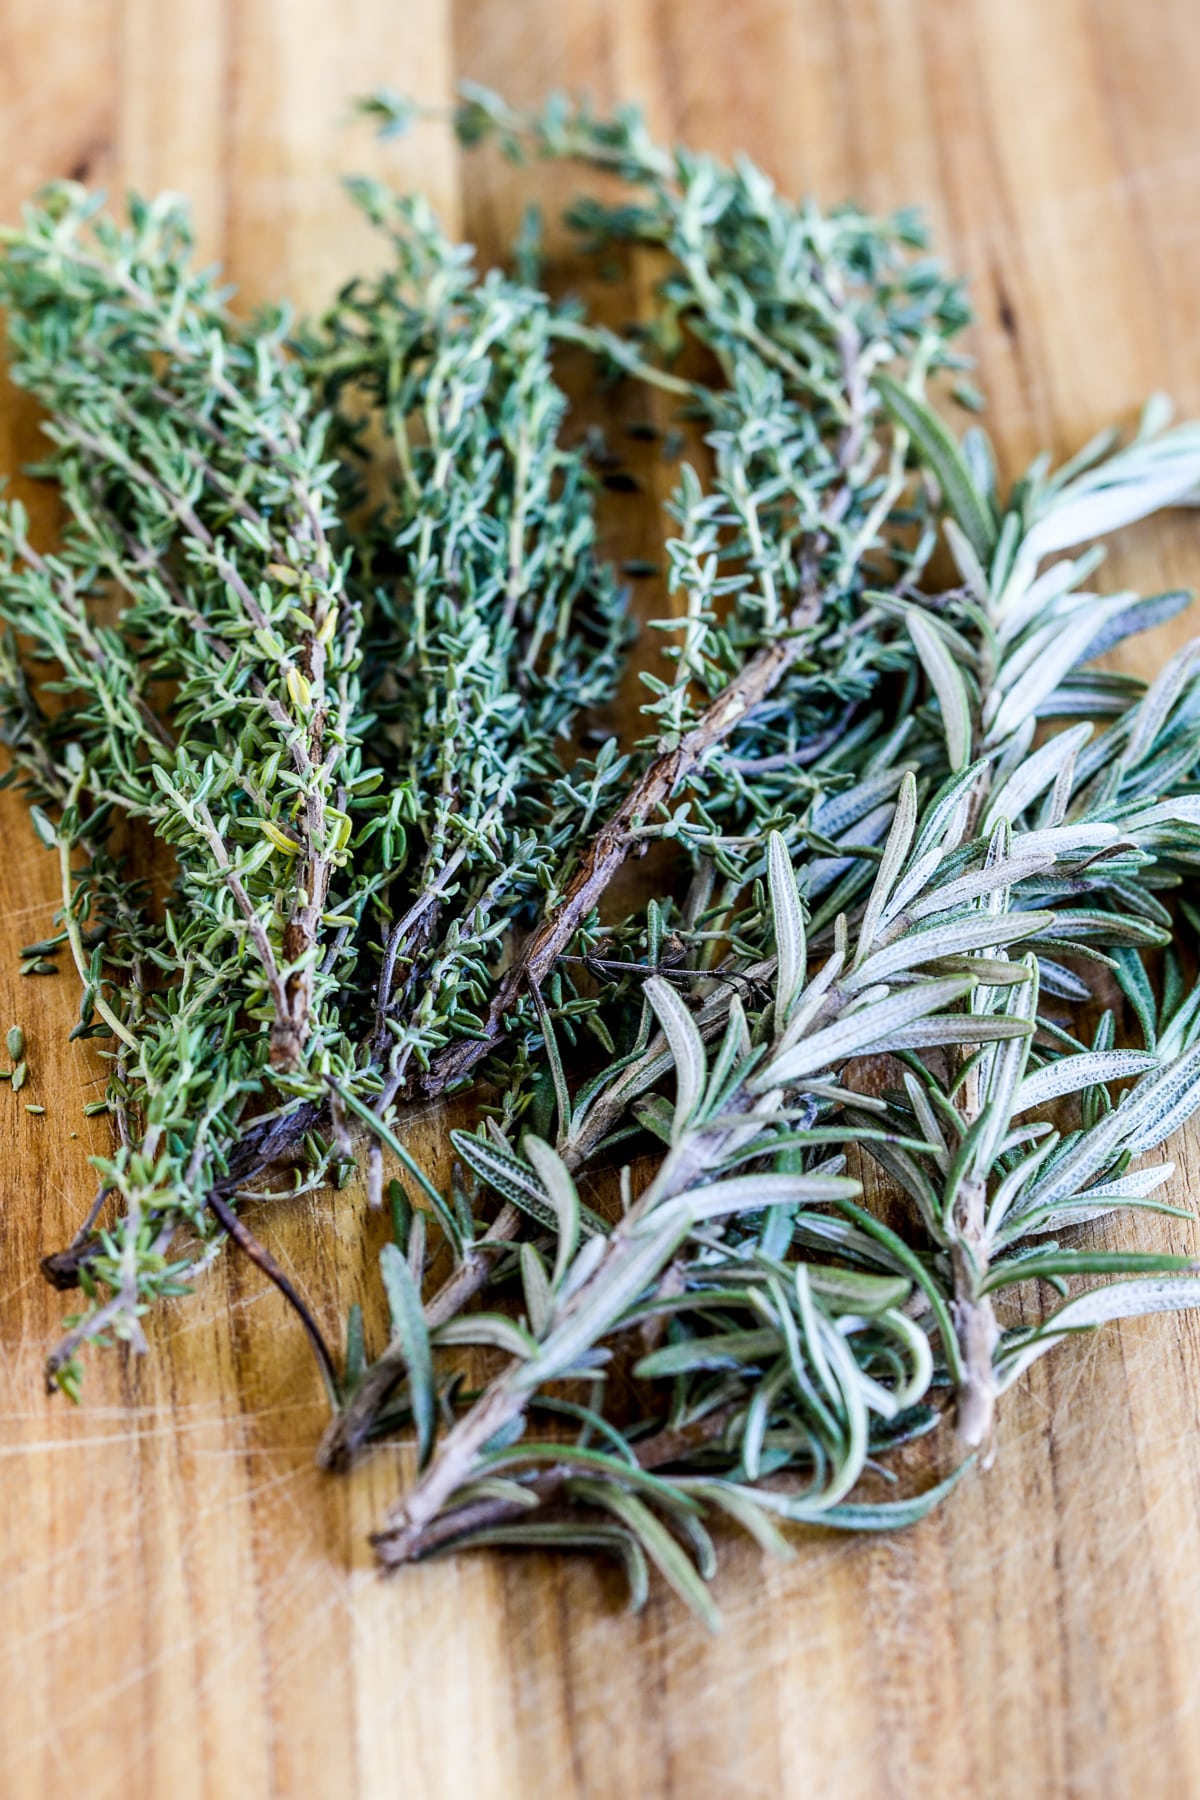 Rosemary and Thyme on cutting board